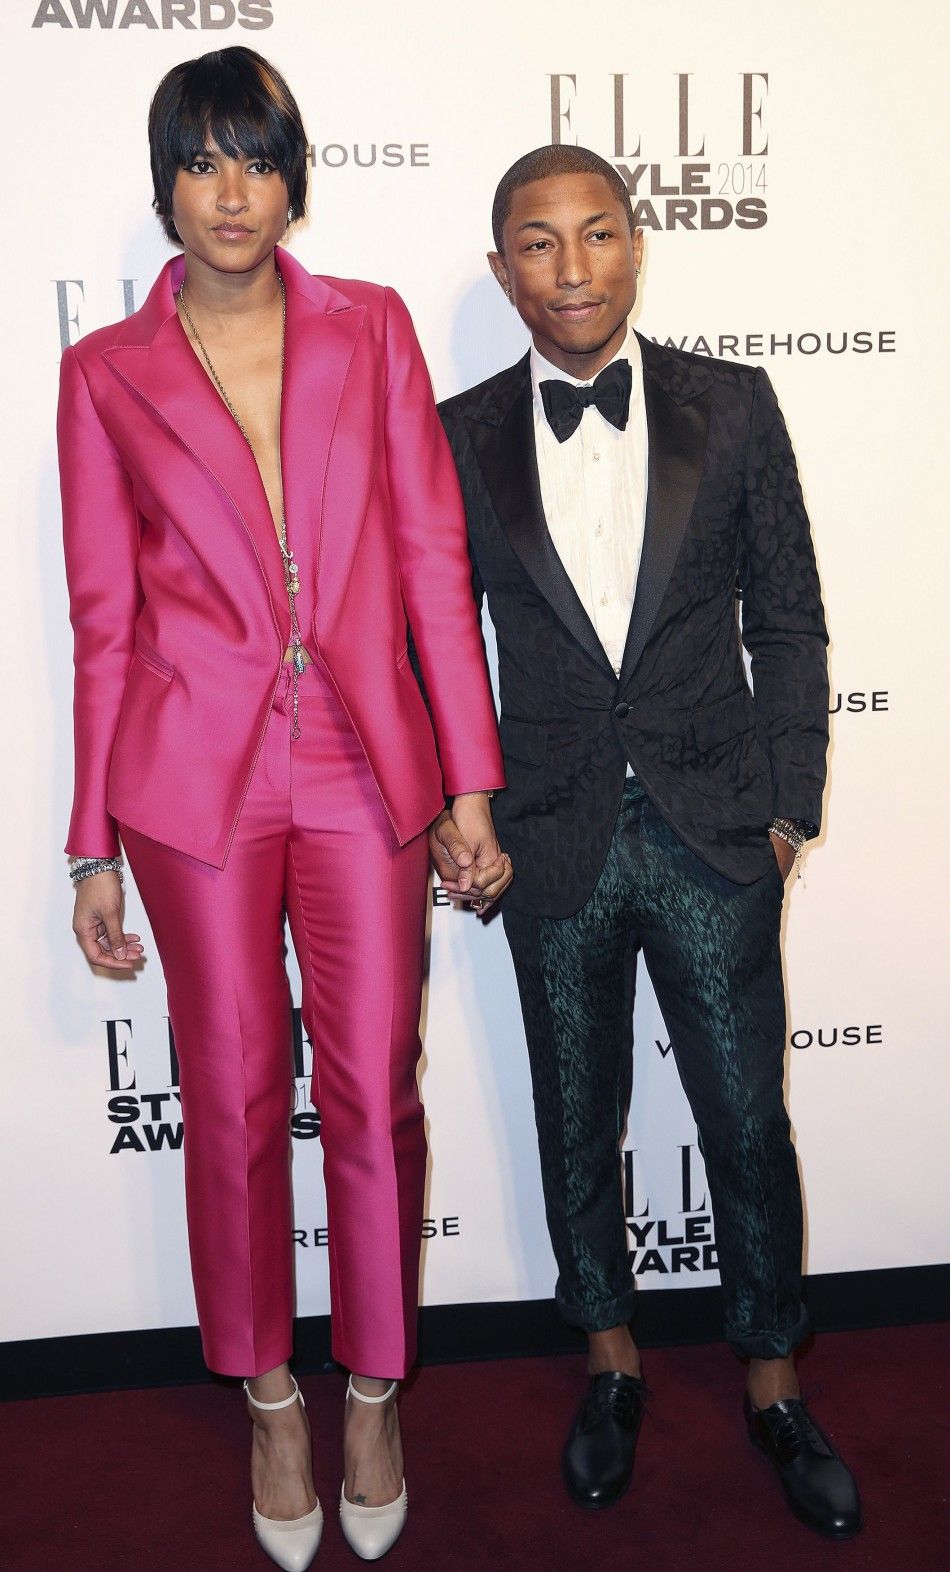 Singer Pharrell Williams and his wife Helen Lasichanh arrive at the Elle Style Awards in London